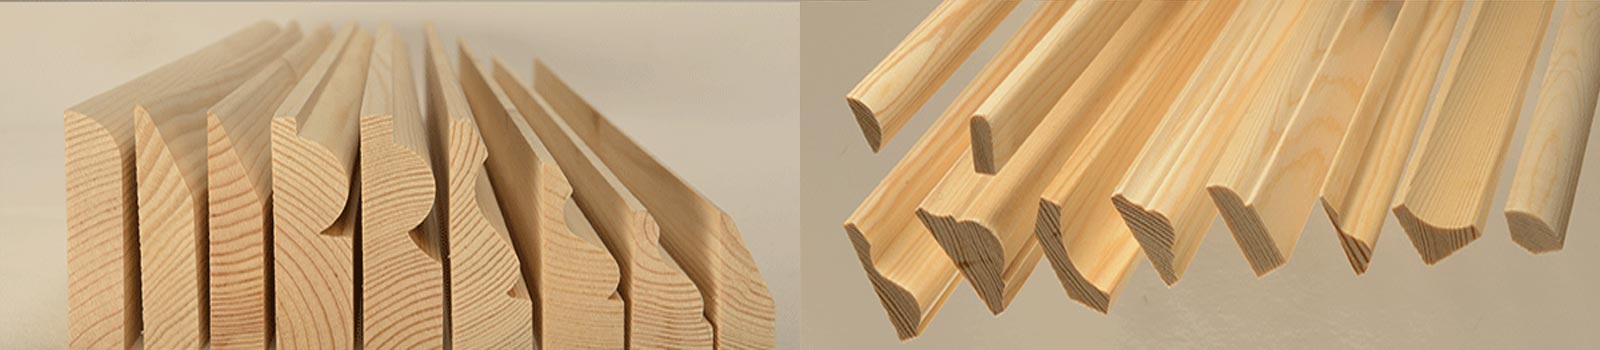 Timber mouldings & architraves